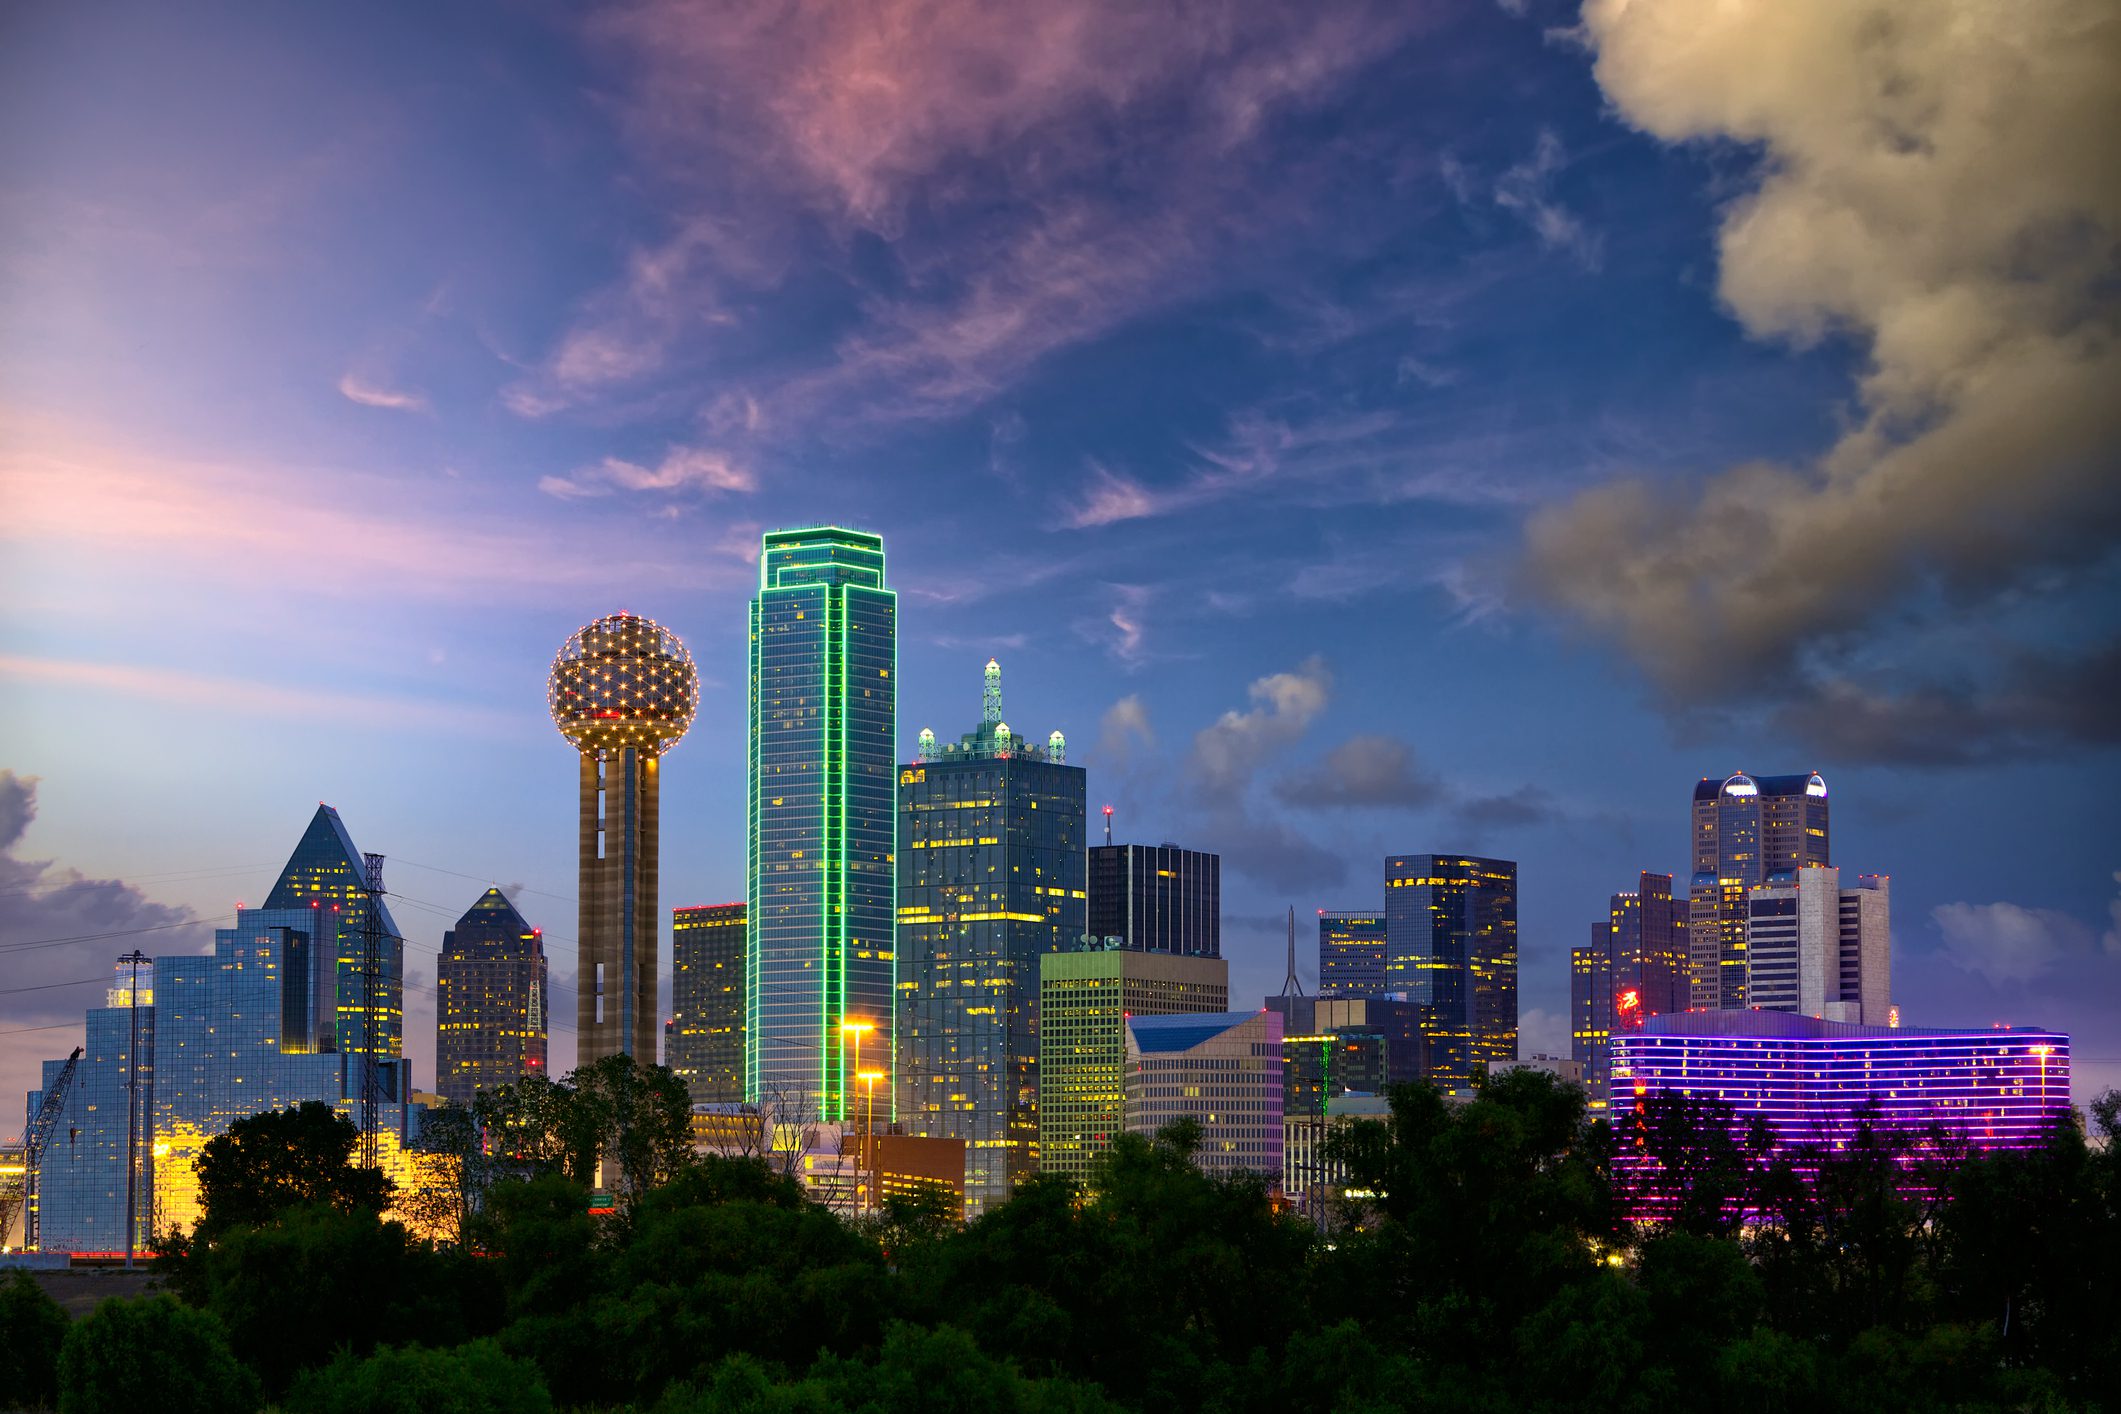 Real Estate Mogul Predicts Dallas Will Be U.S.' 3rdLargest City by